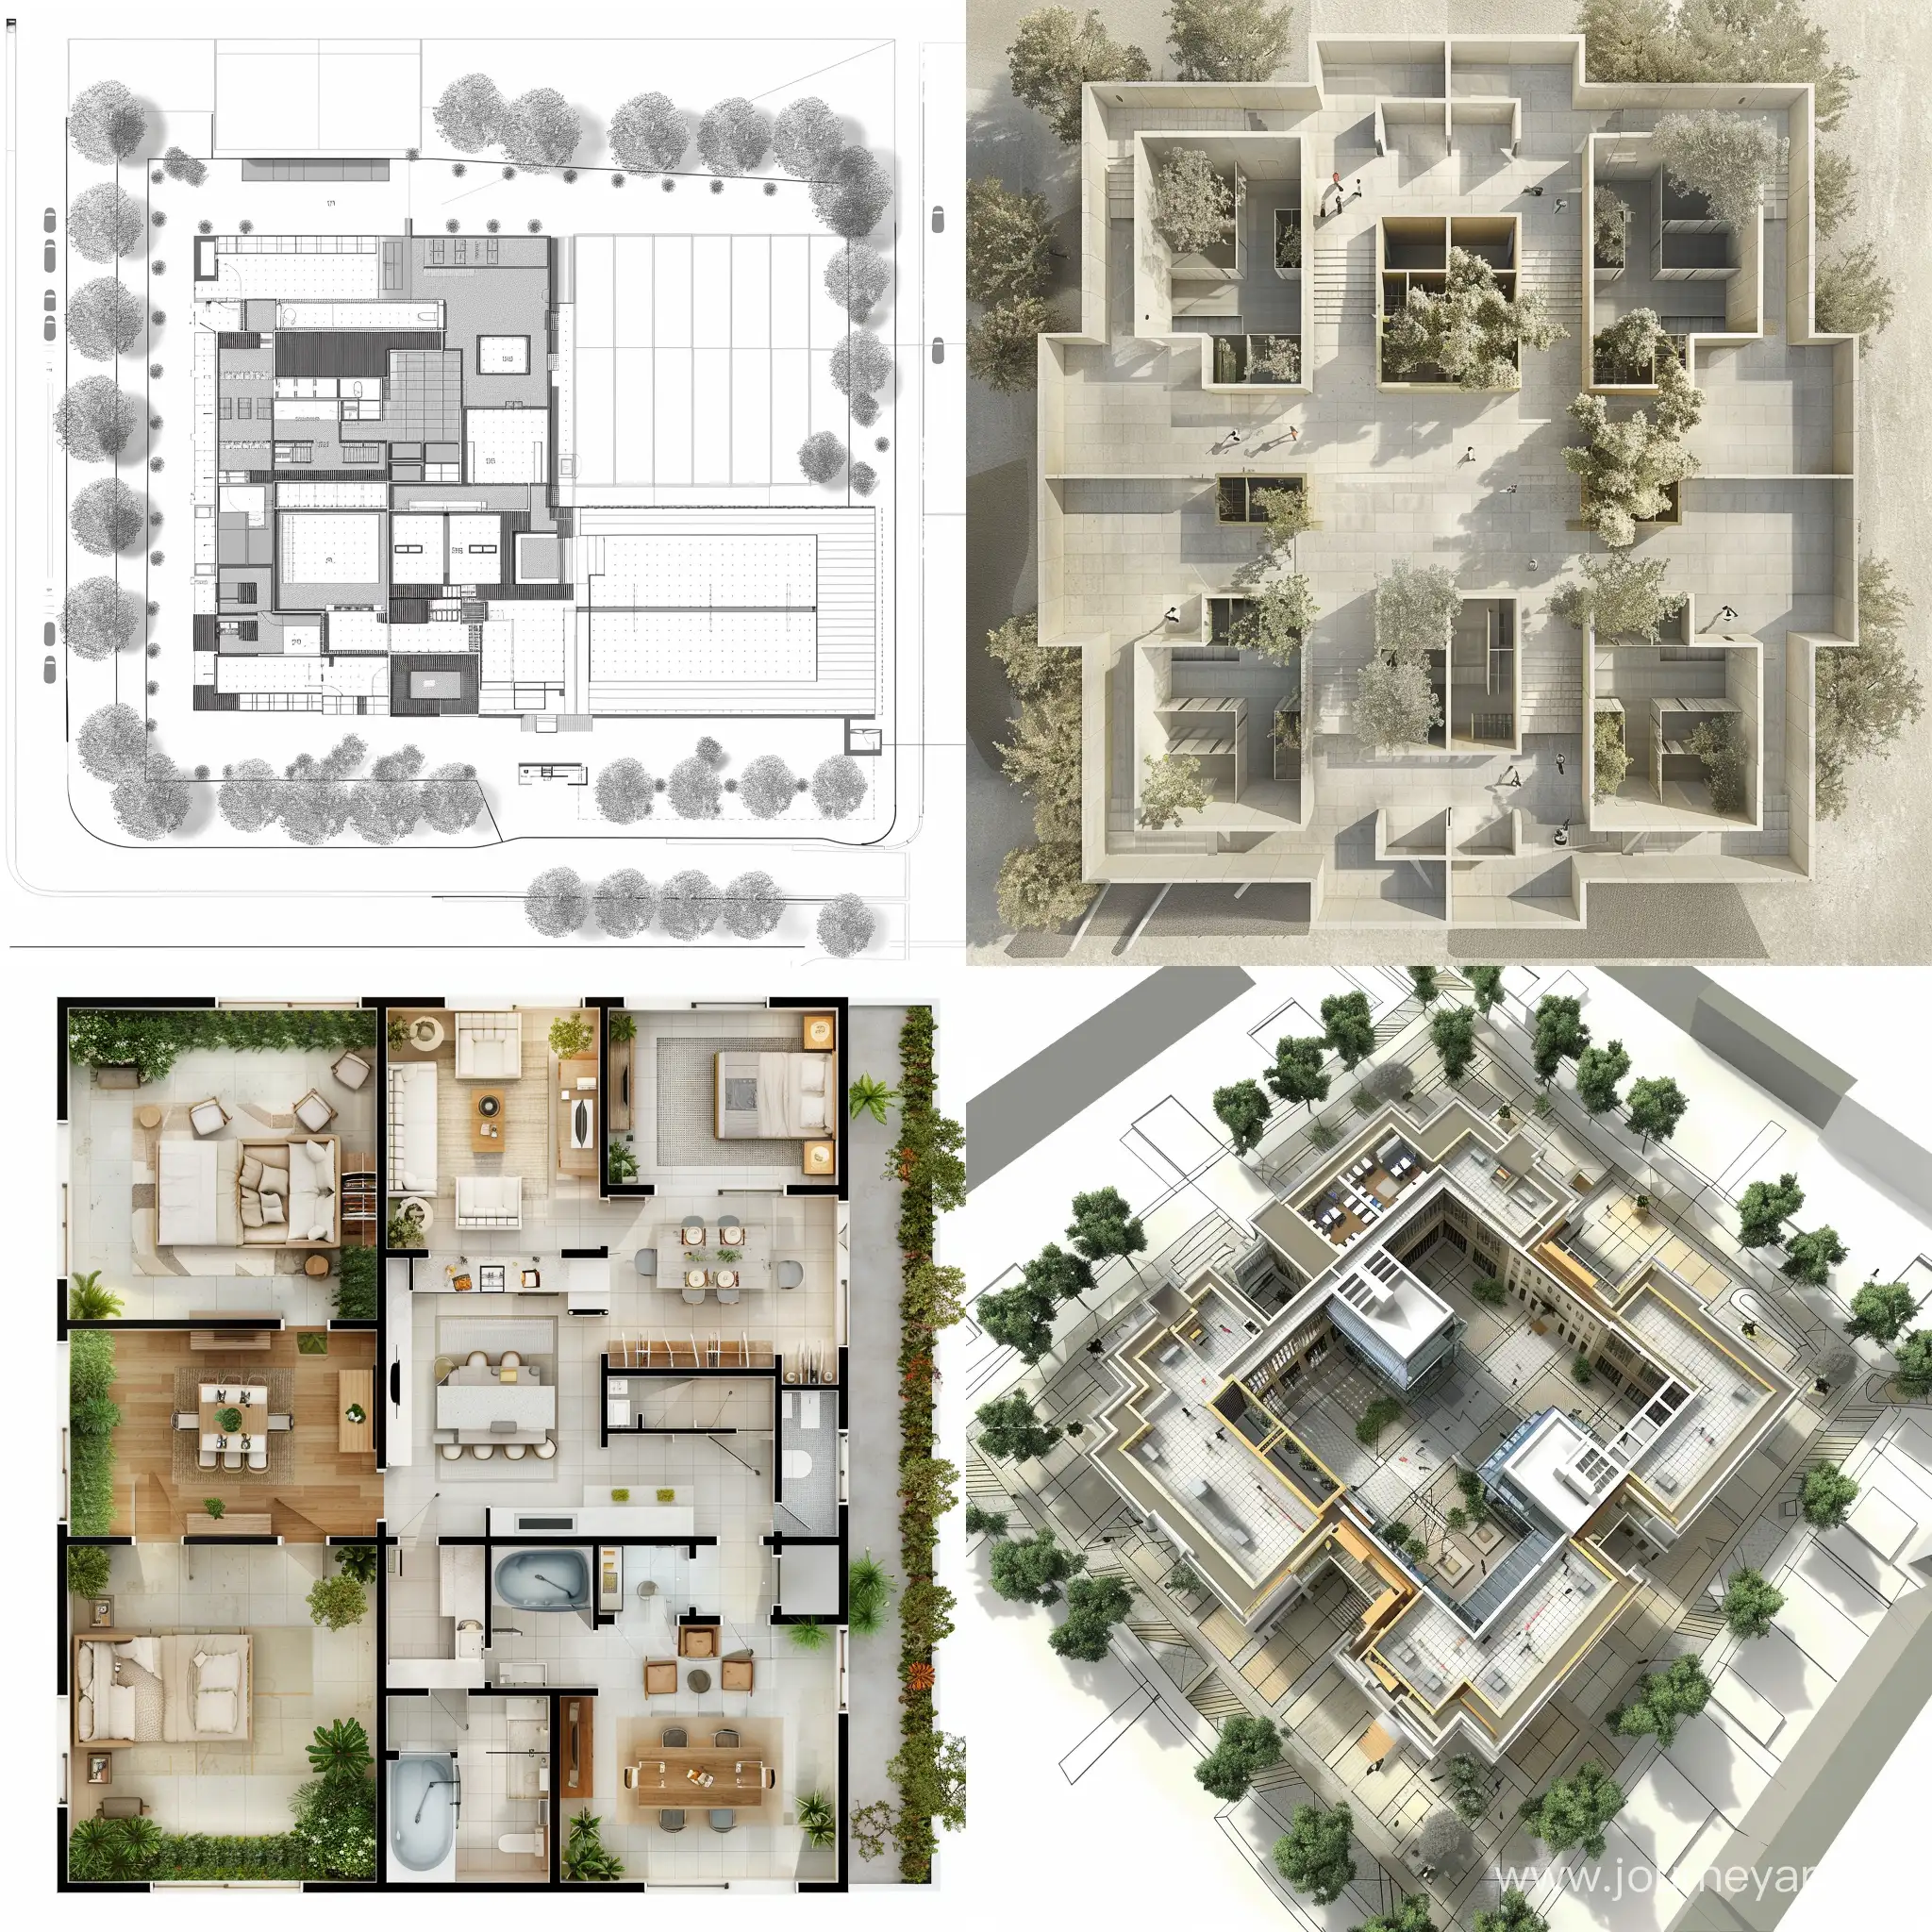 Modern-Architecture-Square-and-Rectangular-Floor-Plans